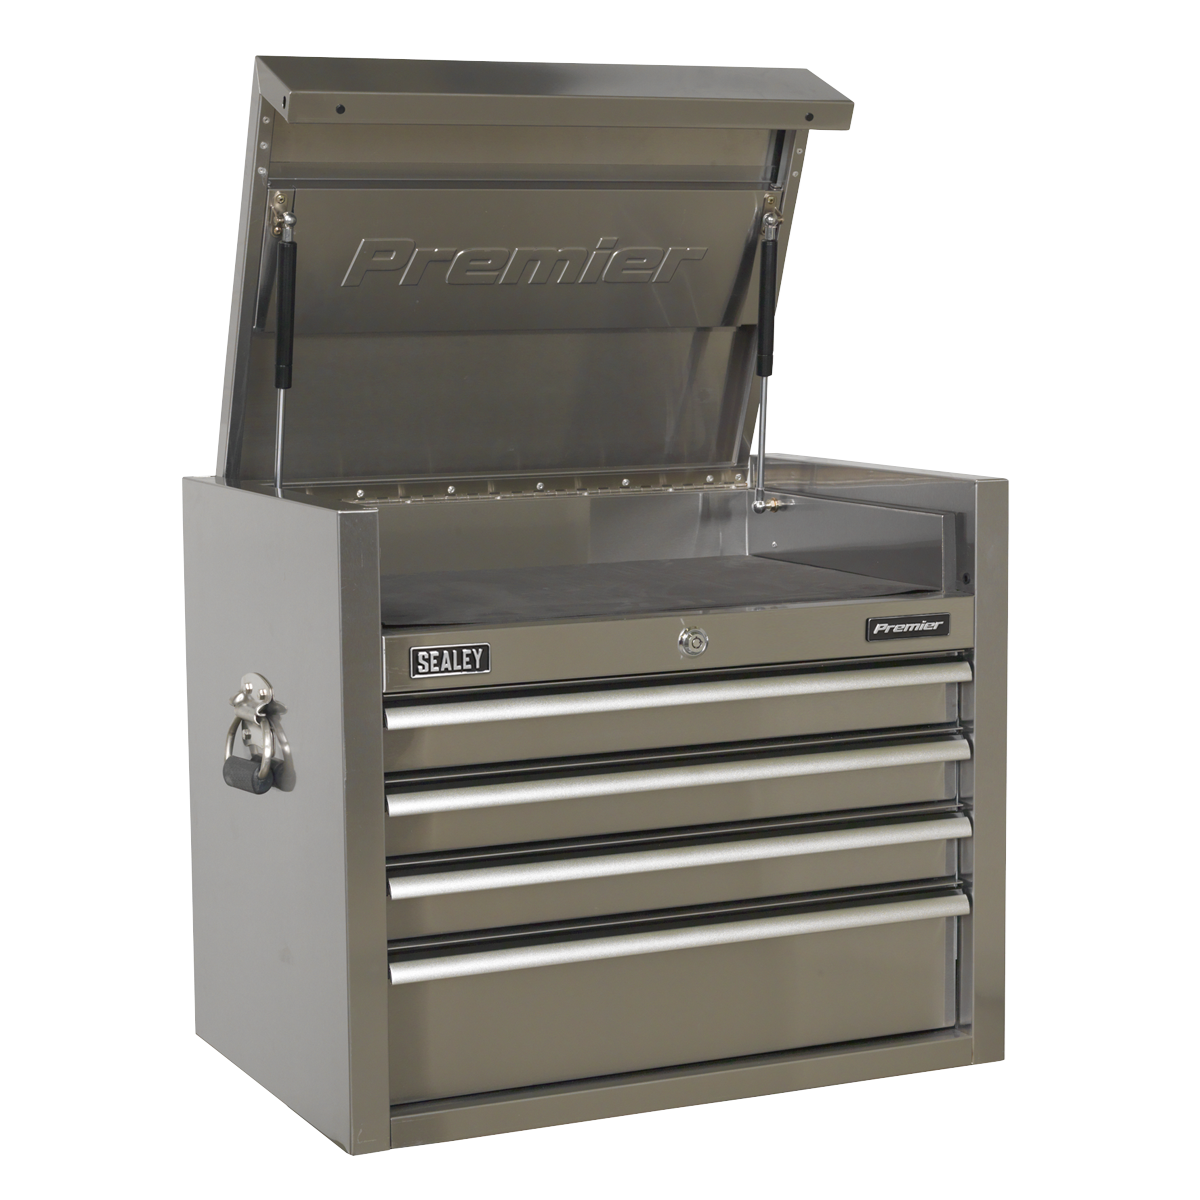 Sealey Premier Stainless Steel Tool Chests (PTB66004SS, PTB67506SS​, PTB104008SS, PTB105511SS Option Sizes )